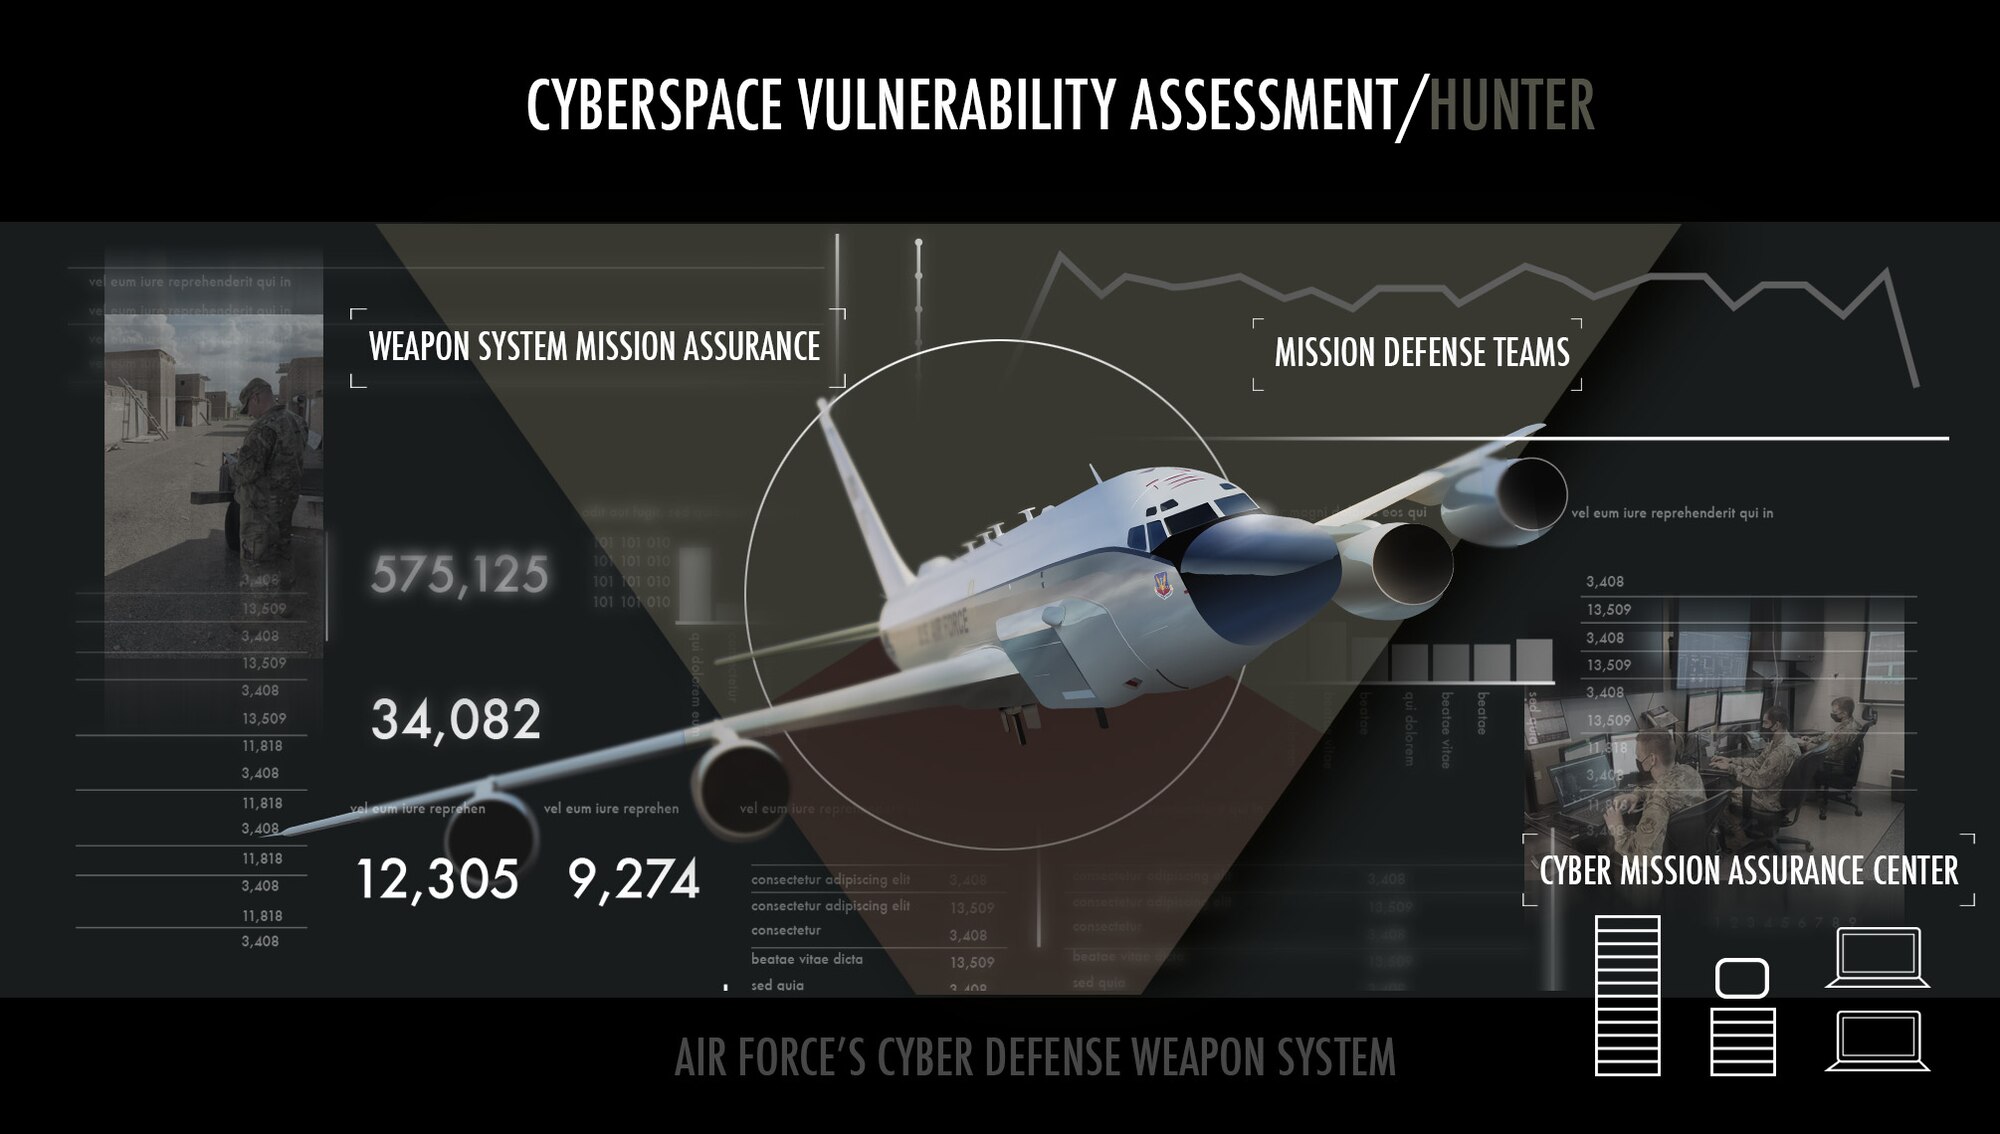 Graphic showing RC-135 aircraft, two images of Airmen performing the mission, lists three missions of squadron, and various stats representing a cyberspace vulnerability assessment.